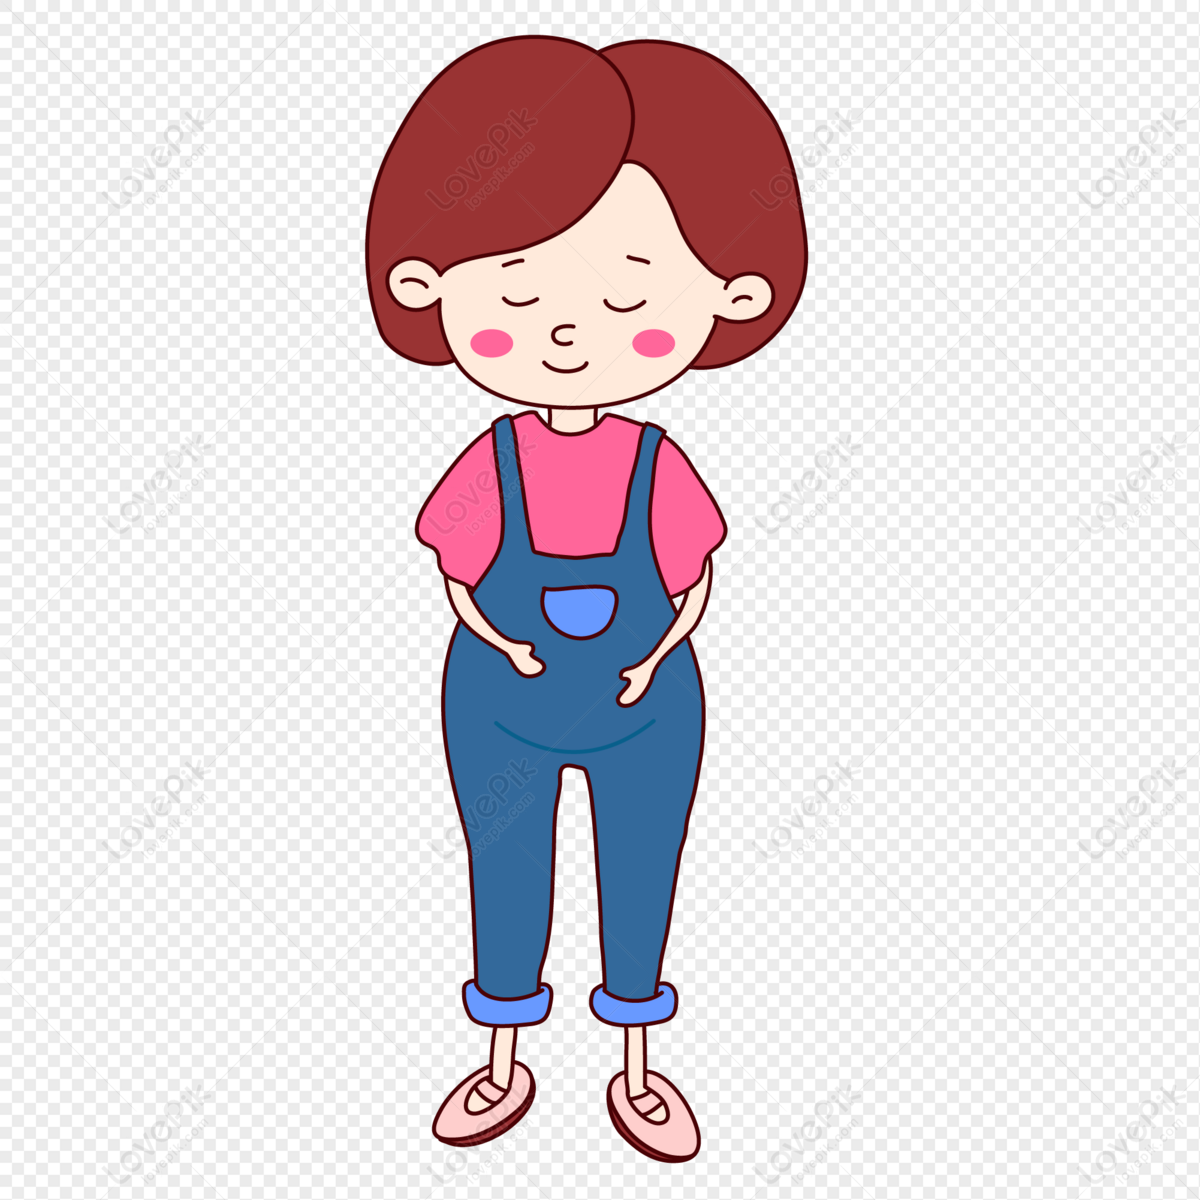 Pregnant Mother Cartoon Drawing PNG Hd Transparent Image And Clipart Image  For Free Download - Lovepik | 401136294